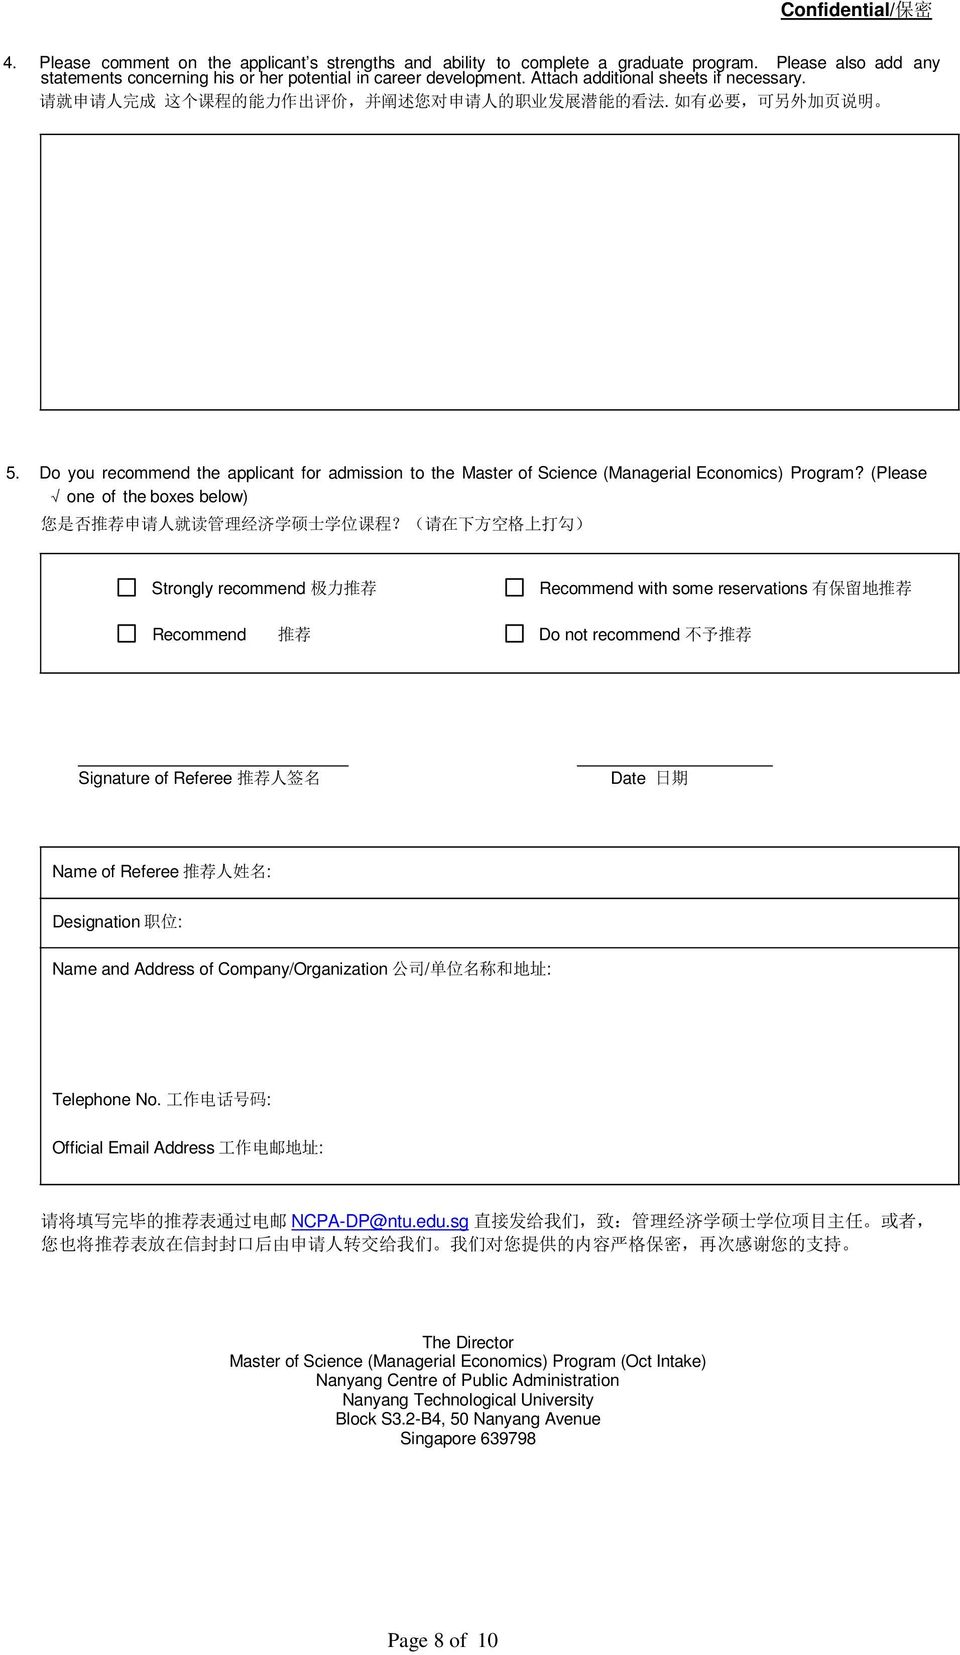 Do you recommend the applicant for admission to the Master of Science (Managerial Economics) Program? (Please one of the boxes below) 您 是 否 推 荐 申 请 人 就 读 管 理 经 济 学 硕 士 学 位 课 程?